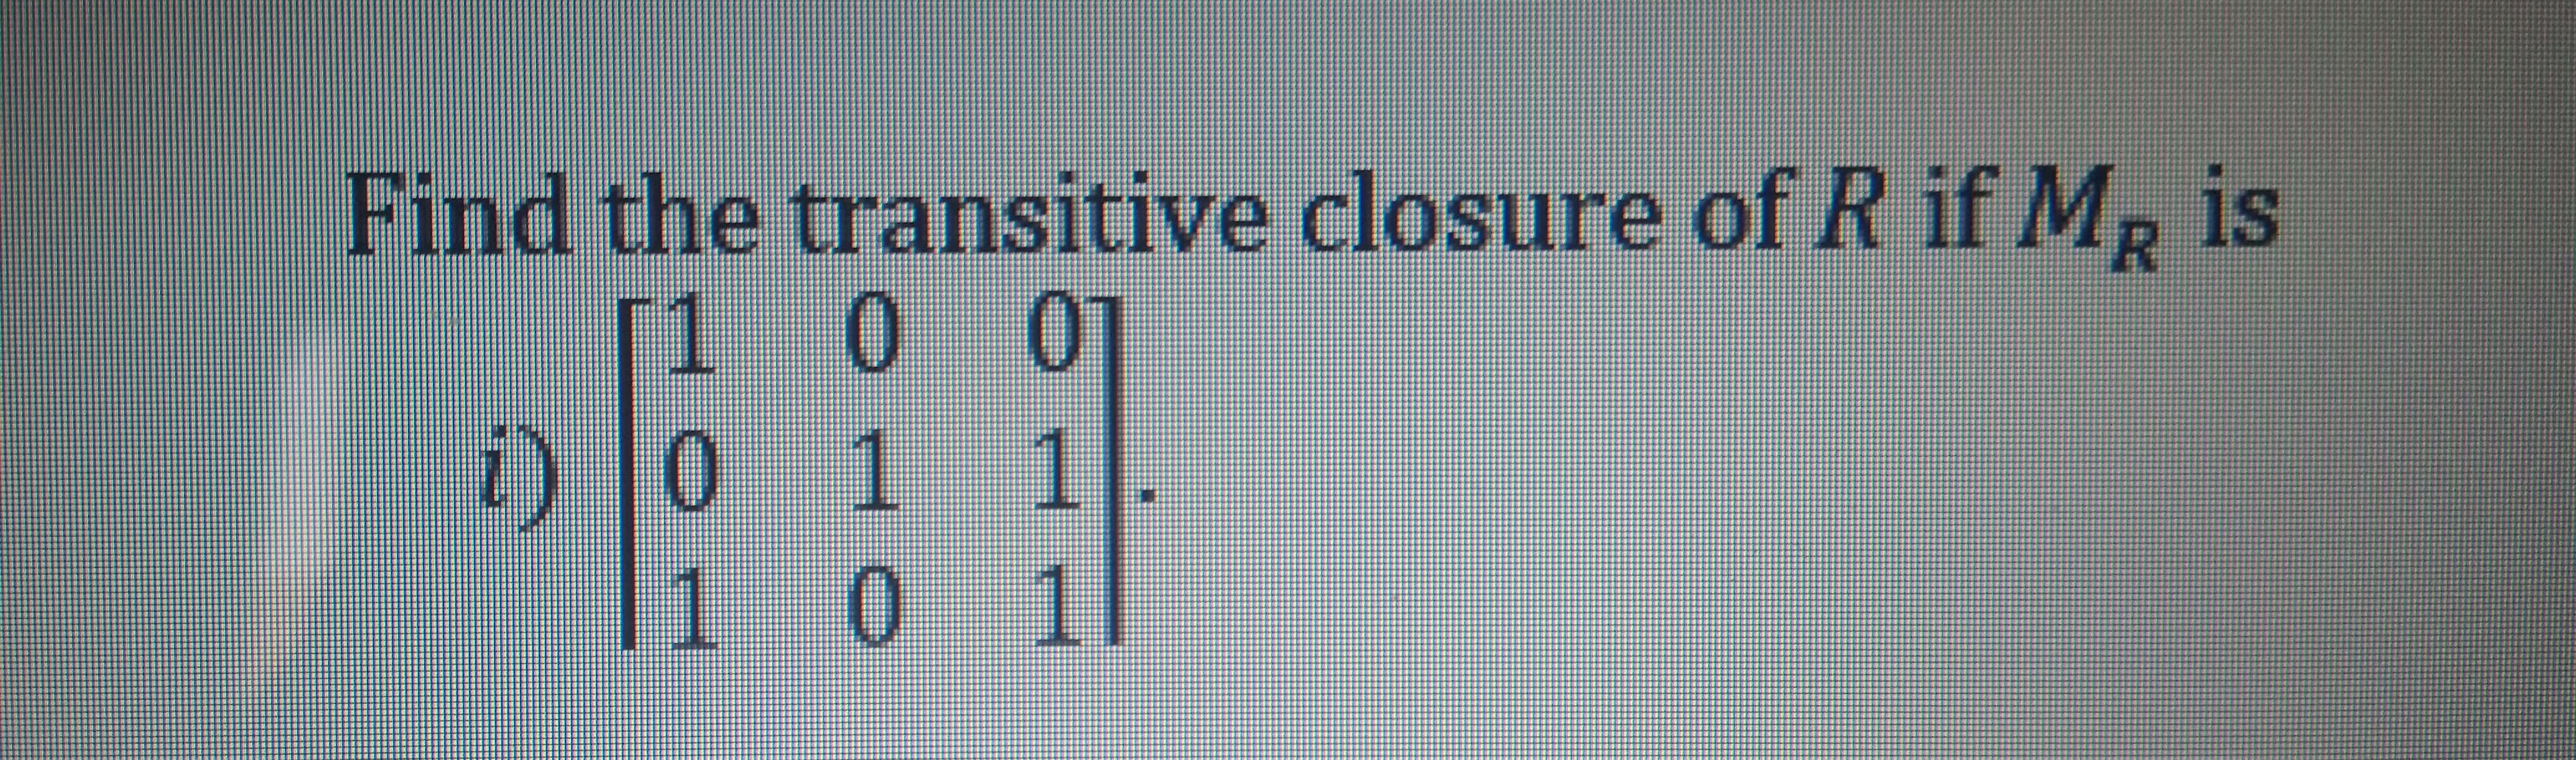 Find the transitive closure of R if MR is
